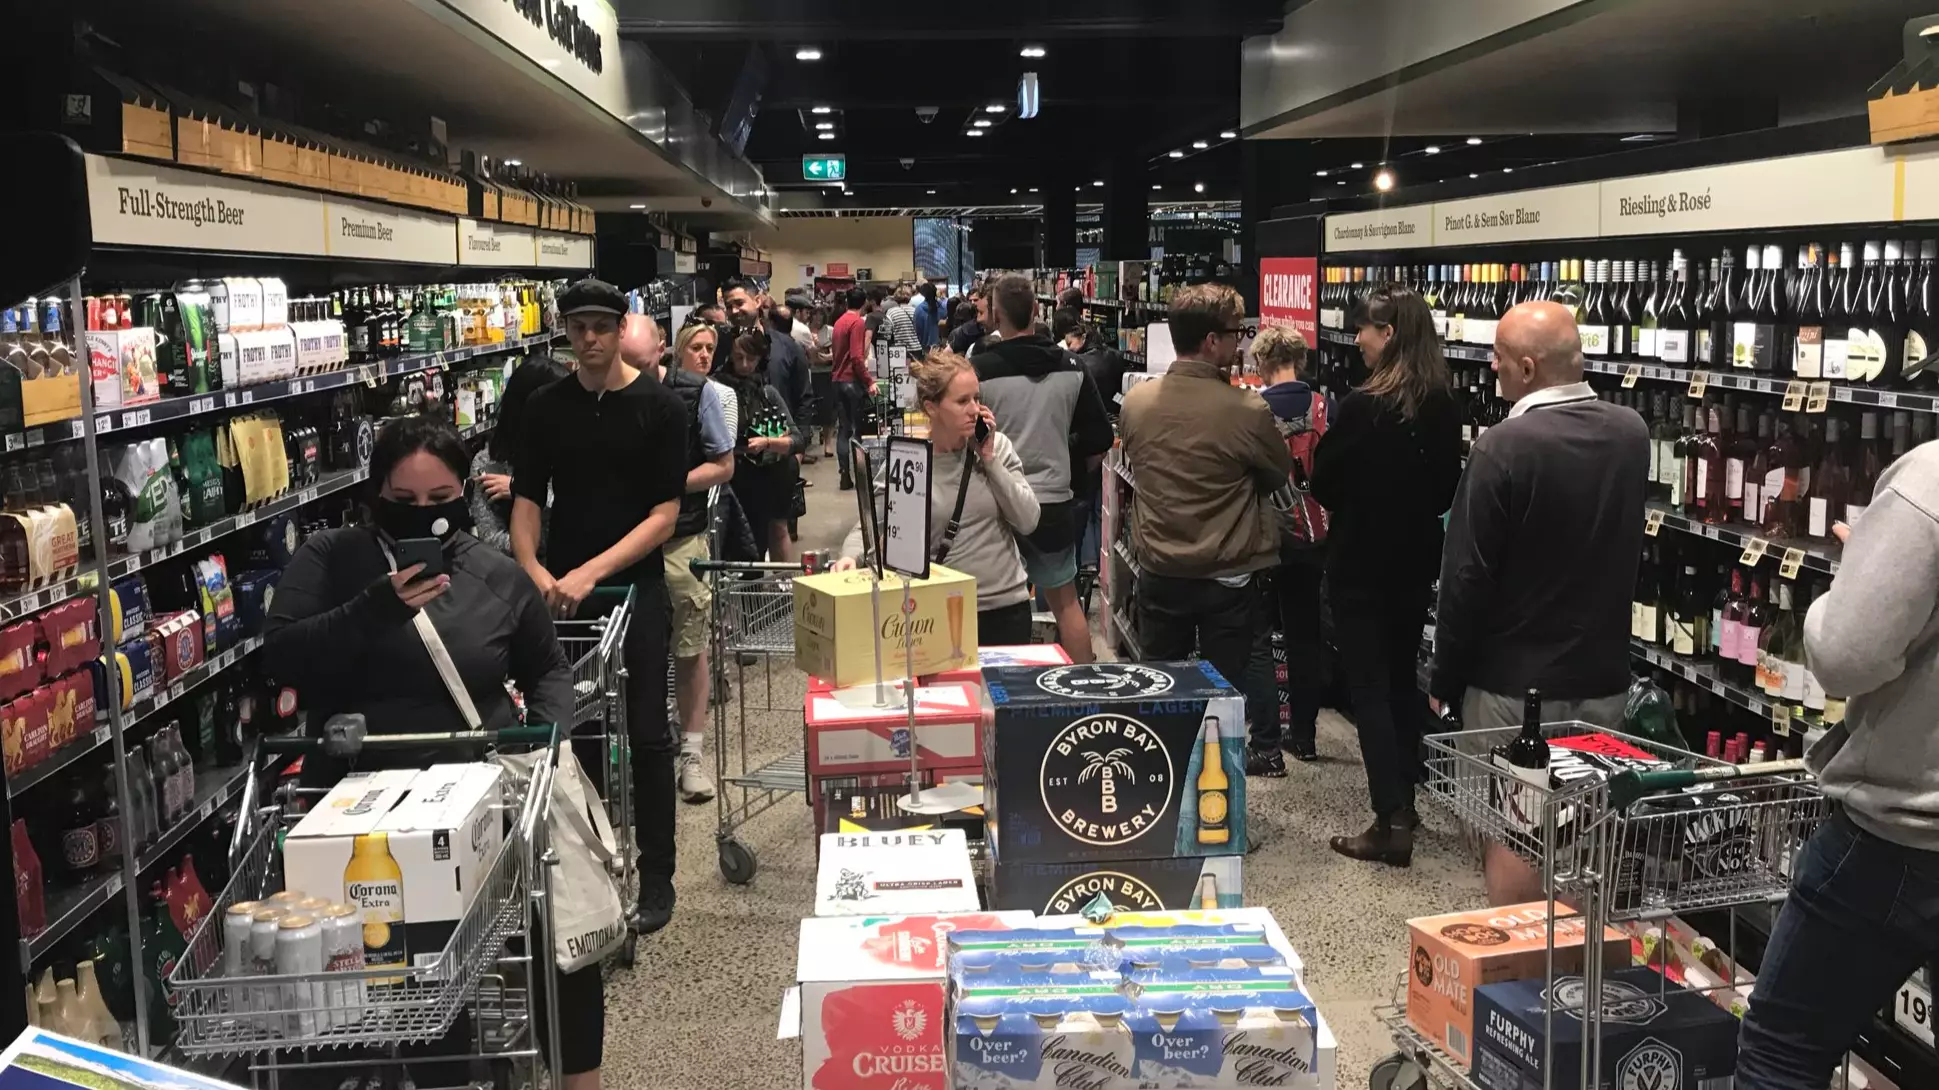 Australians Started Panic Buying Alcohol After Non-Essential Service Shutdown Announcement